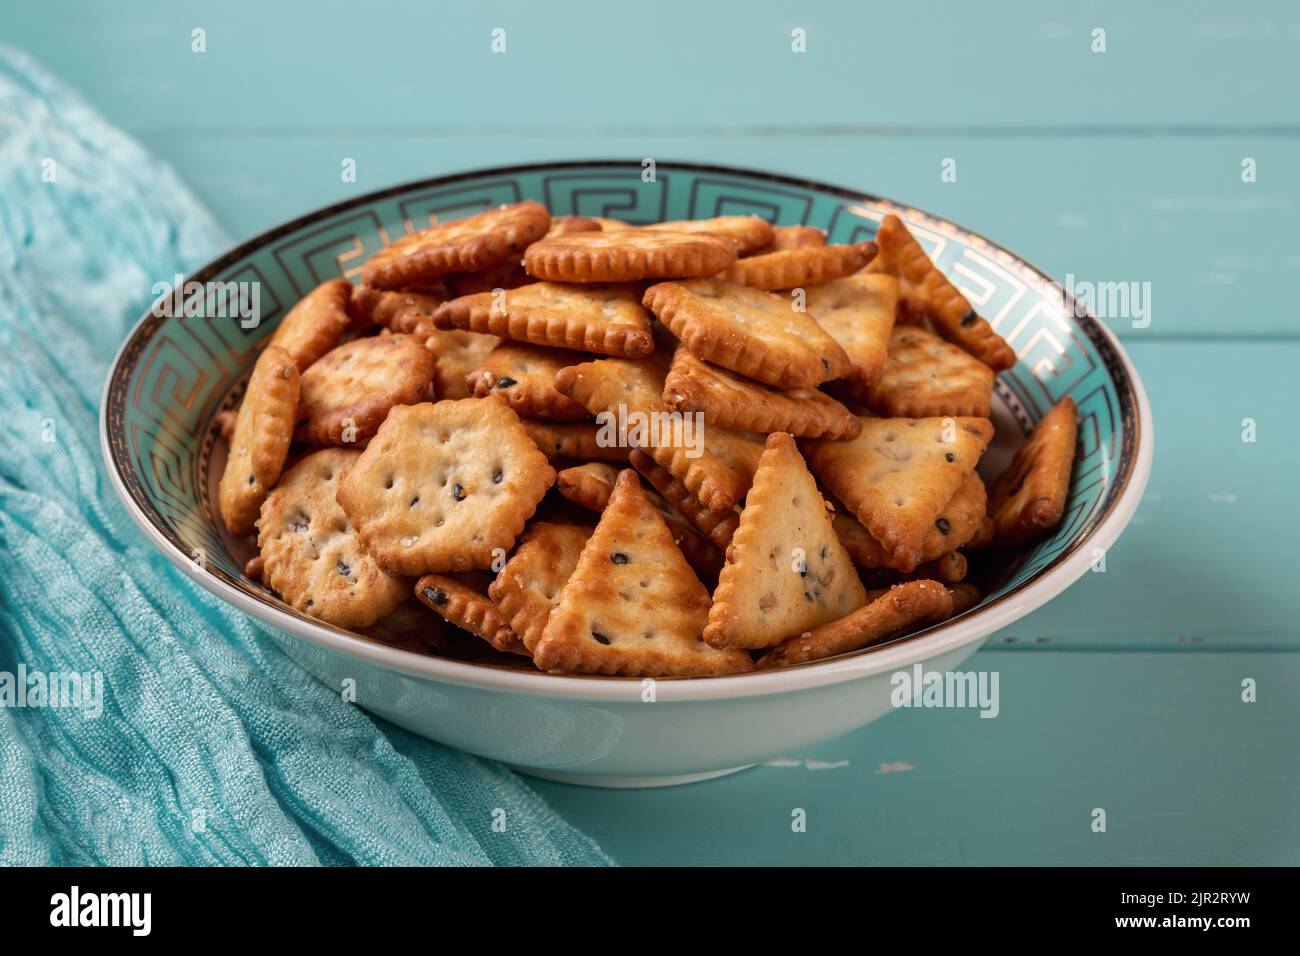 Teal bowl full of saltine crackers over turquoise wood background. Salty crackers with black and white sesame seeds in a blue deep plate. Ready to eat Stock Photo